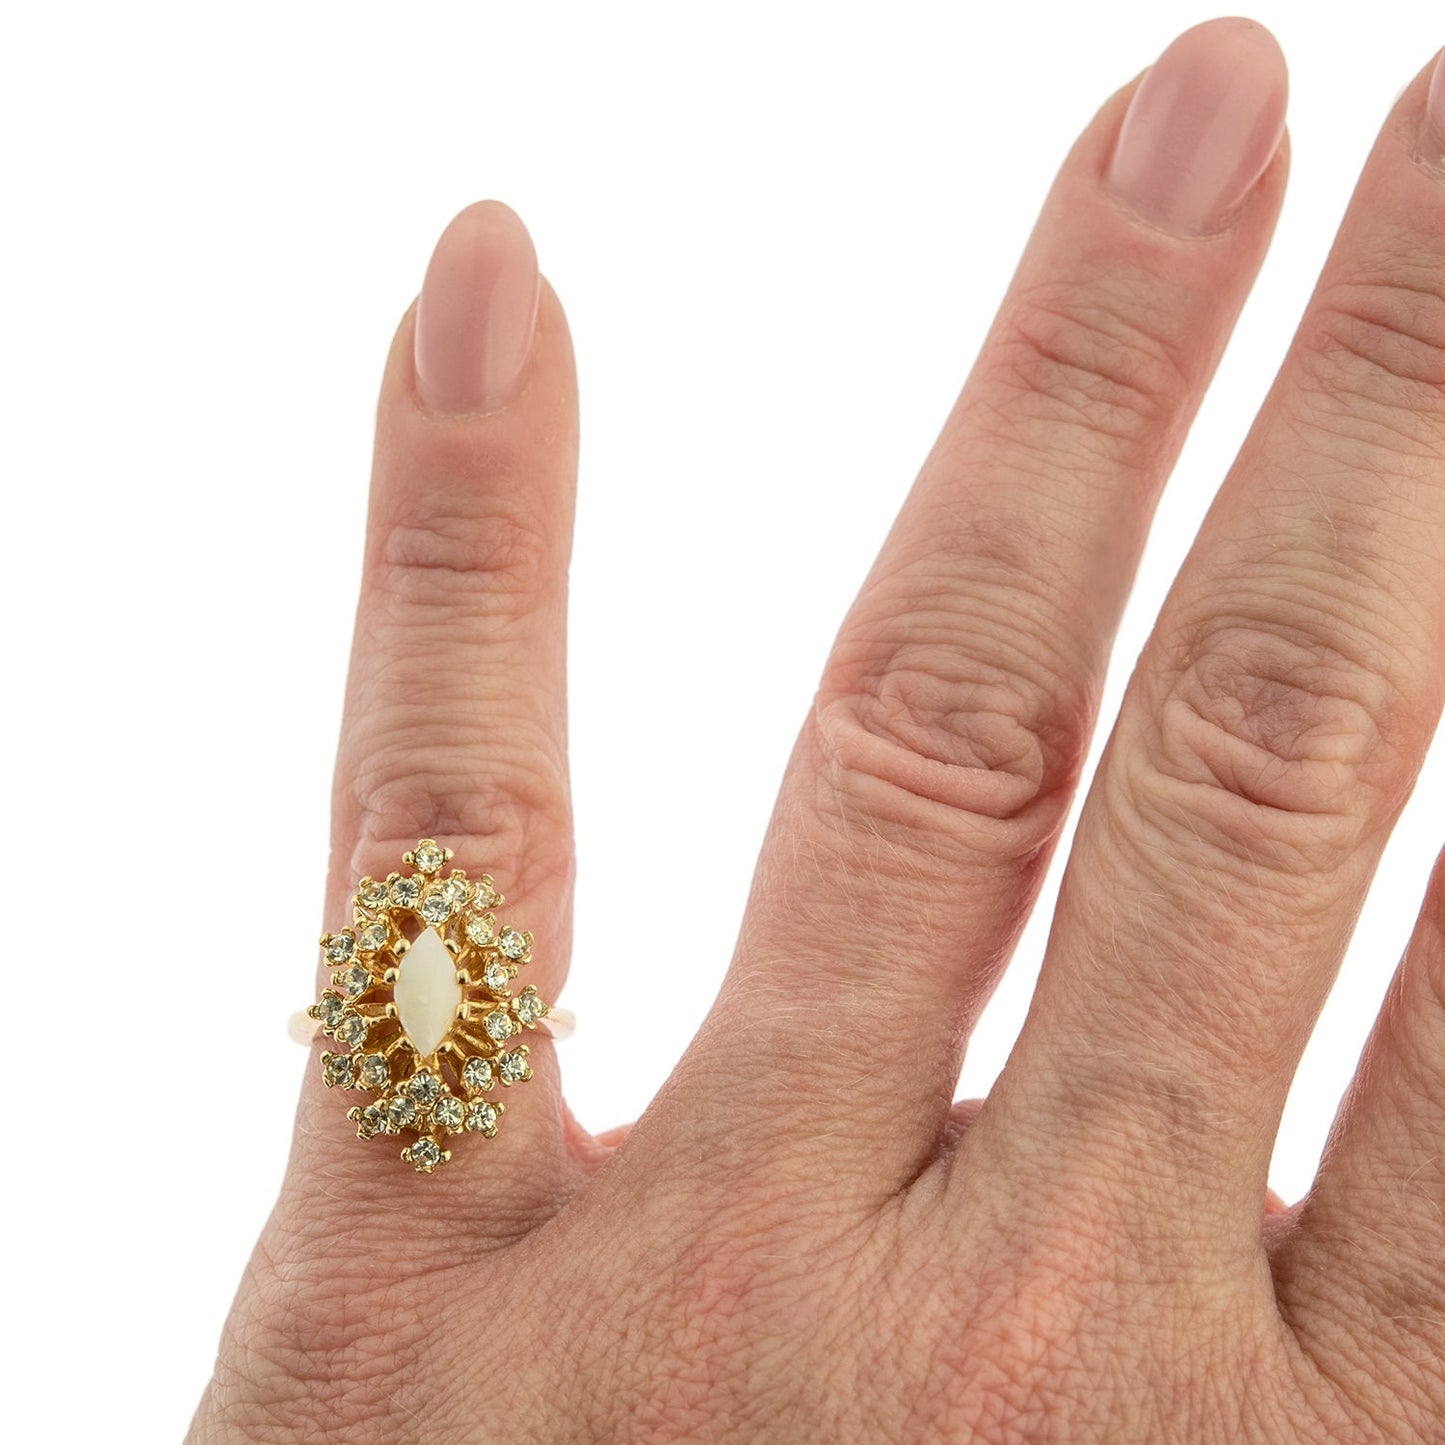 Vintage Ring Genuine Opal and Clear Swarovski Crystals 18k Gold Victorian Style #R221 - Limited Stock - Never Worn